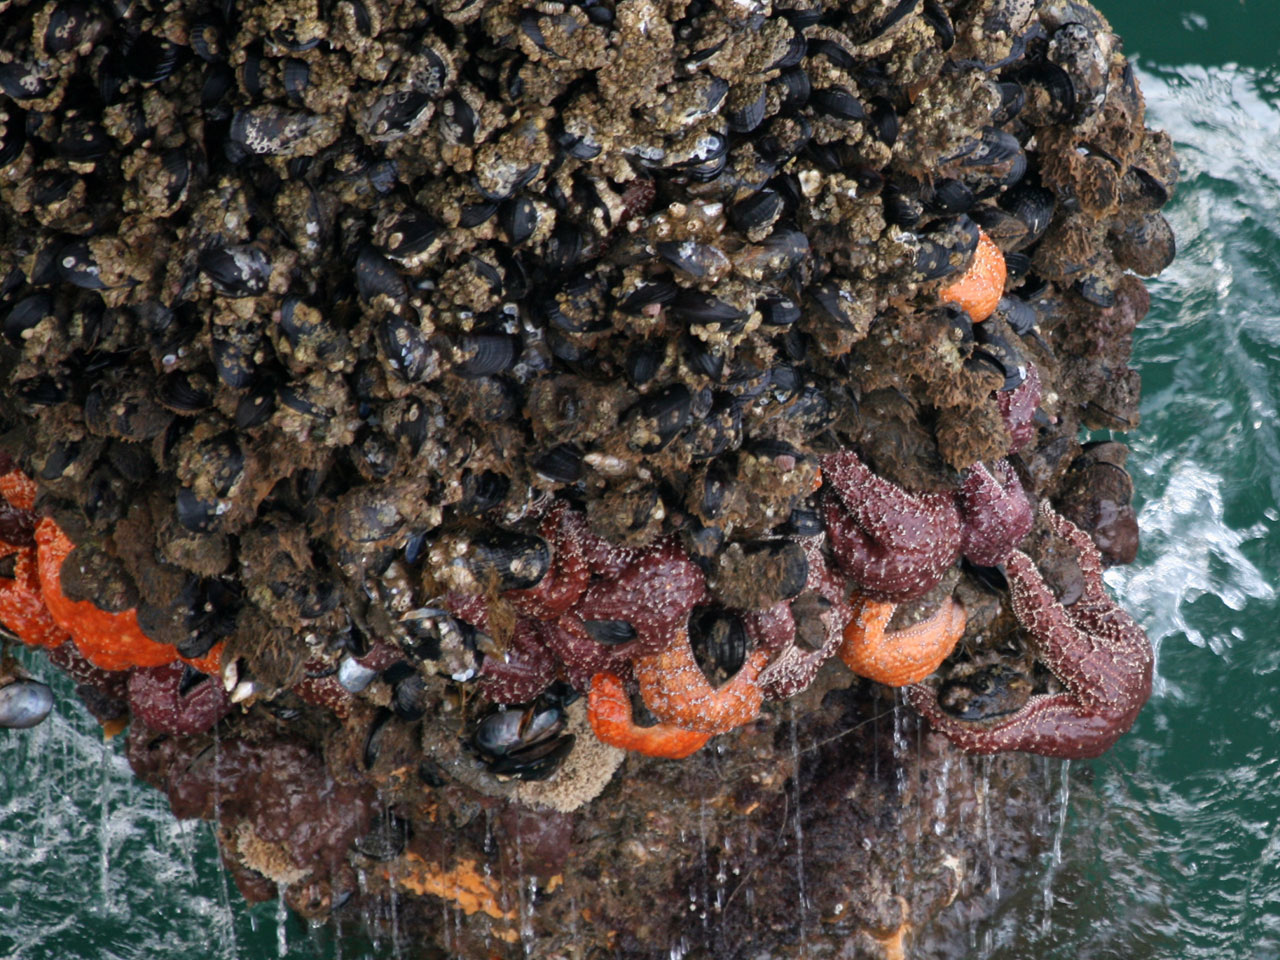 Pier piling of the Huntington Beach Pier, Huntington Beach, CA, encrusted with barnacles and starfish